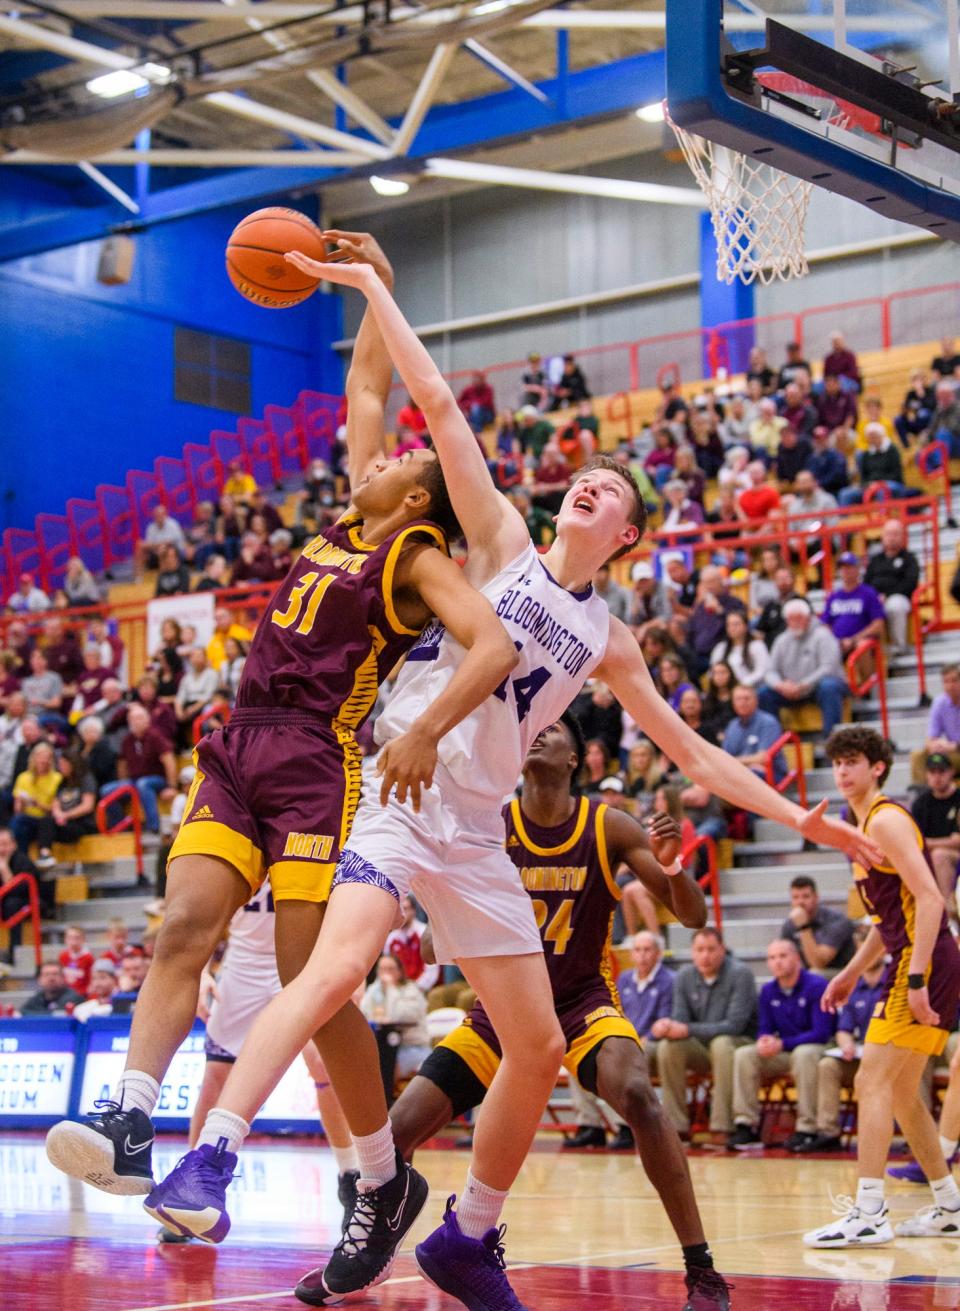 South's Gavin Wisley (14) and North's Bril Kante (31) battle for a rebound during the Bloomington North versus Bloomington South boys basketball sectional final at Martinsville High School on Saturday, March 5, 2022.